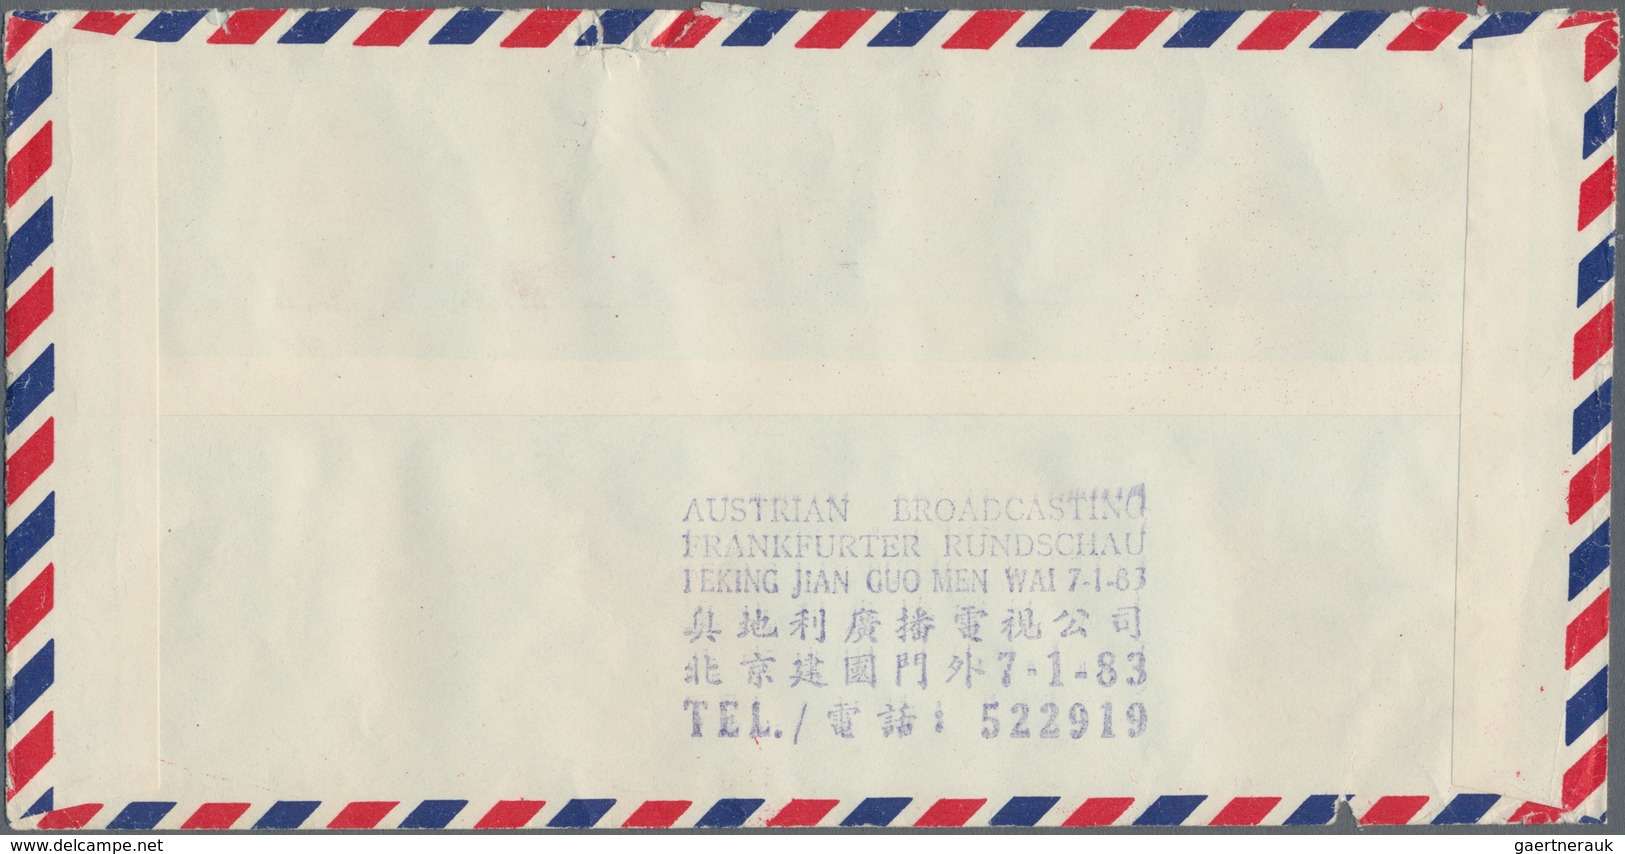 China - Volksrepublik: 1980/82, 4 covers addressed to Linz, Austria, bearing stamps from the booklet